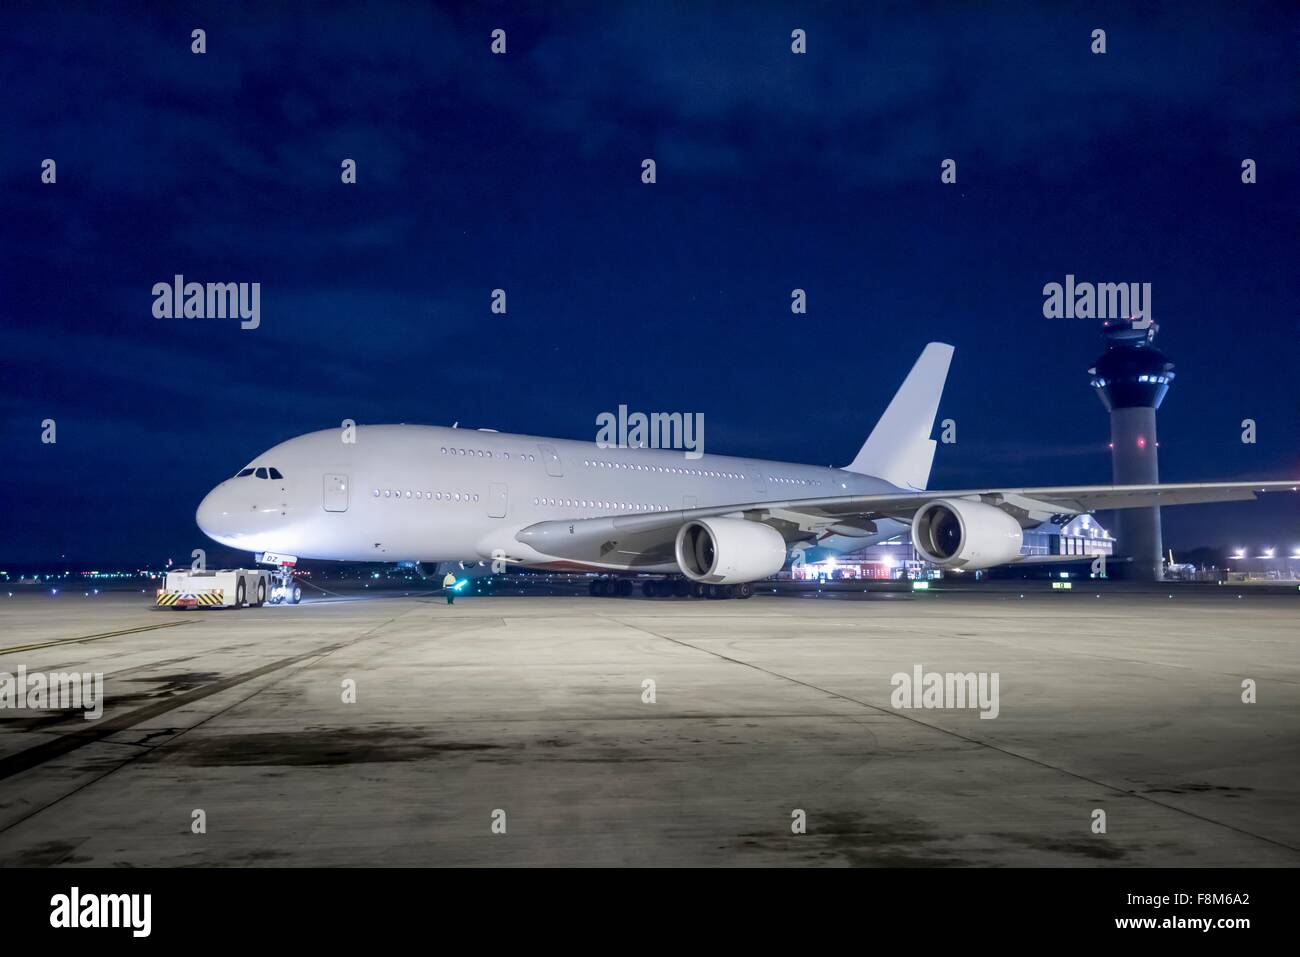 Chief engineer with A380 aircraft on runway at night Stock Photo